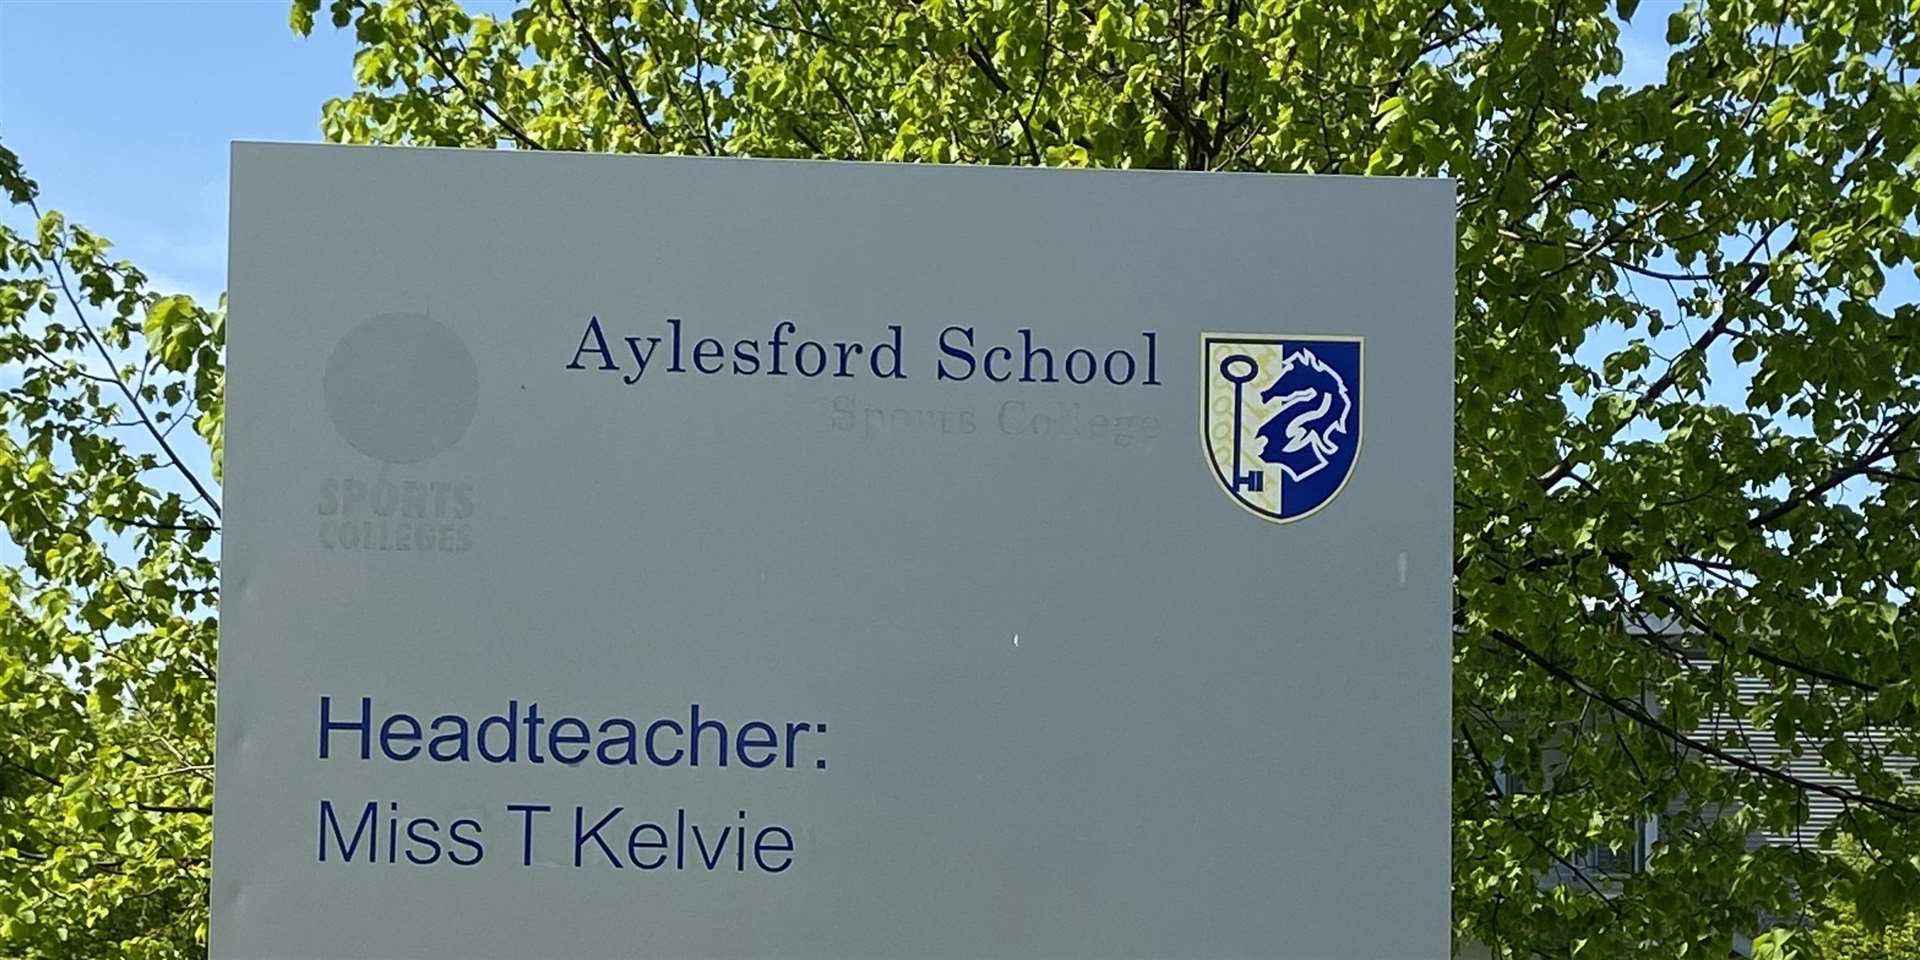 Aylesford School has improved and is now rated 'good' by Ofsted inspectors